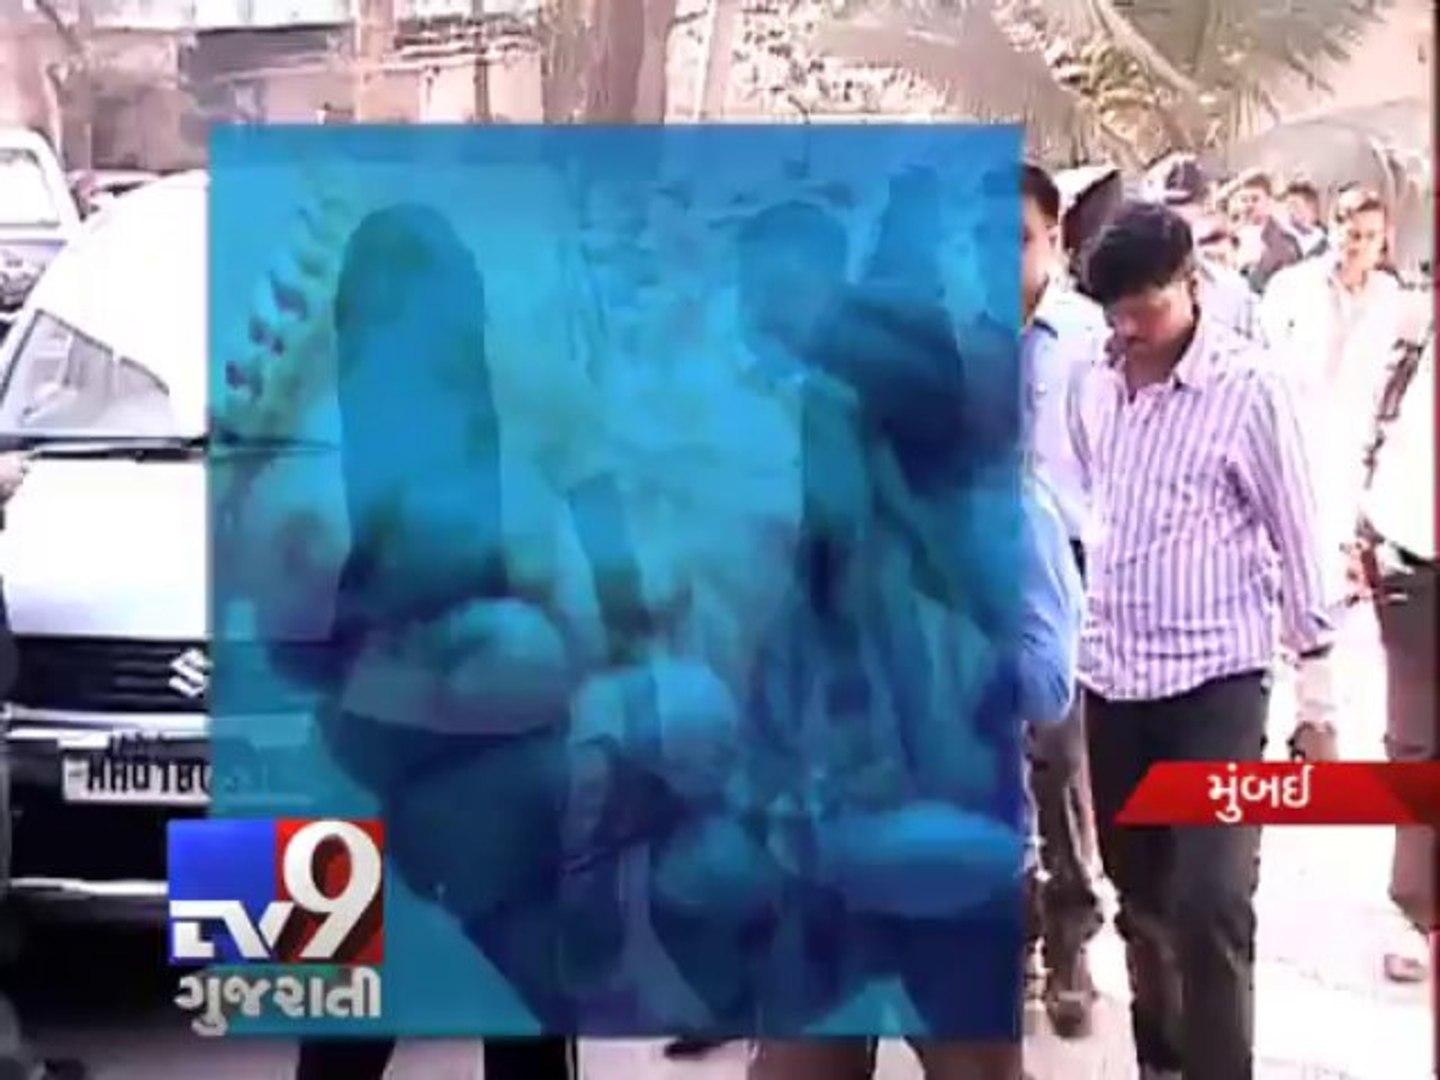 Impotent man forced wife into sex with his friends, Mumbai - Tv9 Gujarati picture